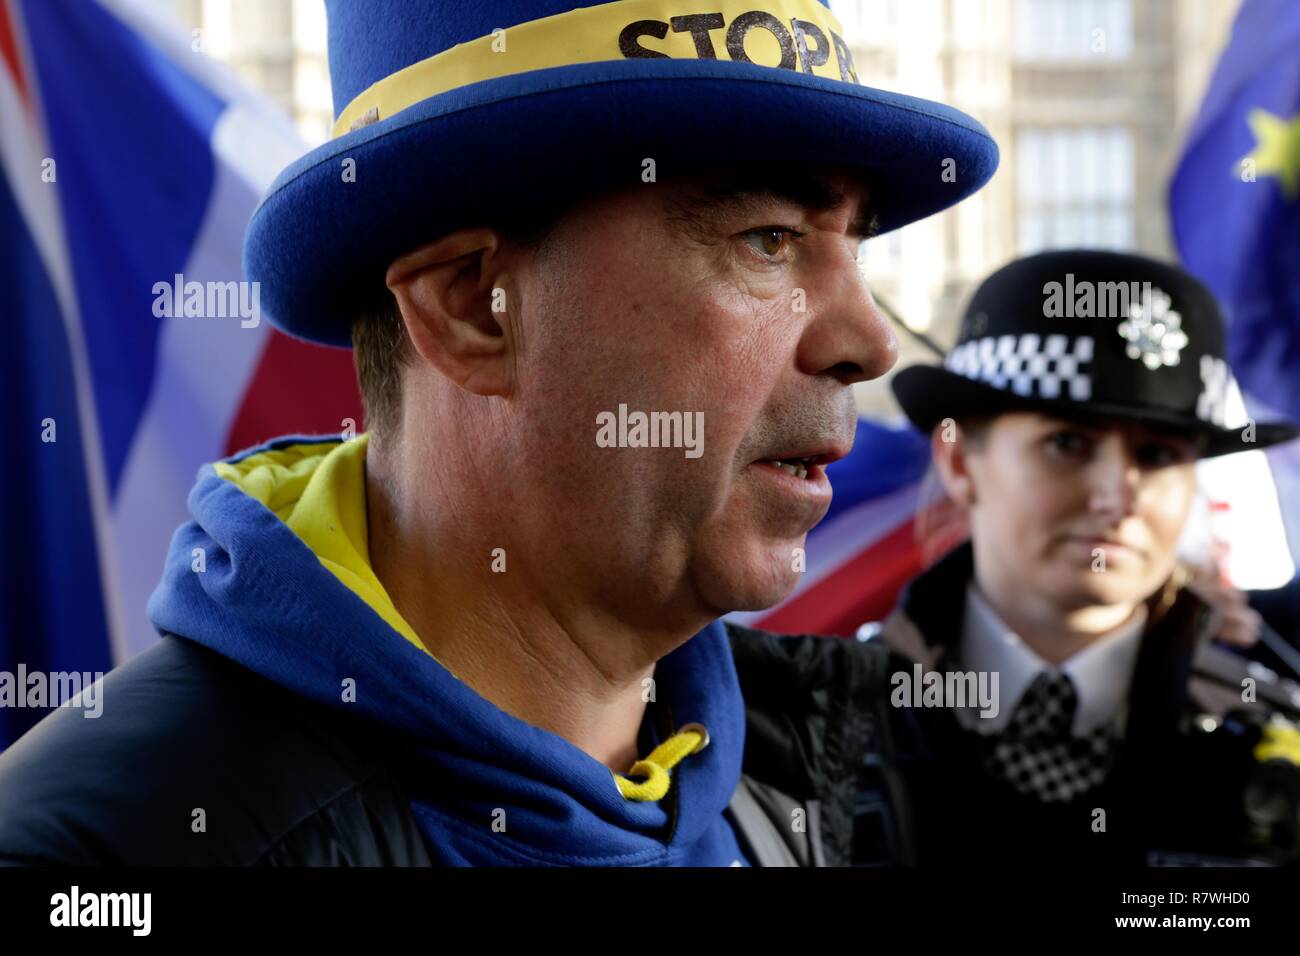 London, UK. Tuesday 11 December 2018 - Steve Bray attends Parliament Green daily to express his Pro Europe views.  Parliament Buildings in London - UK Credit: Iwala/Alamy Live News Stock Photo